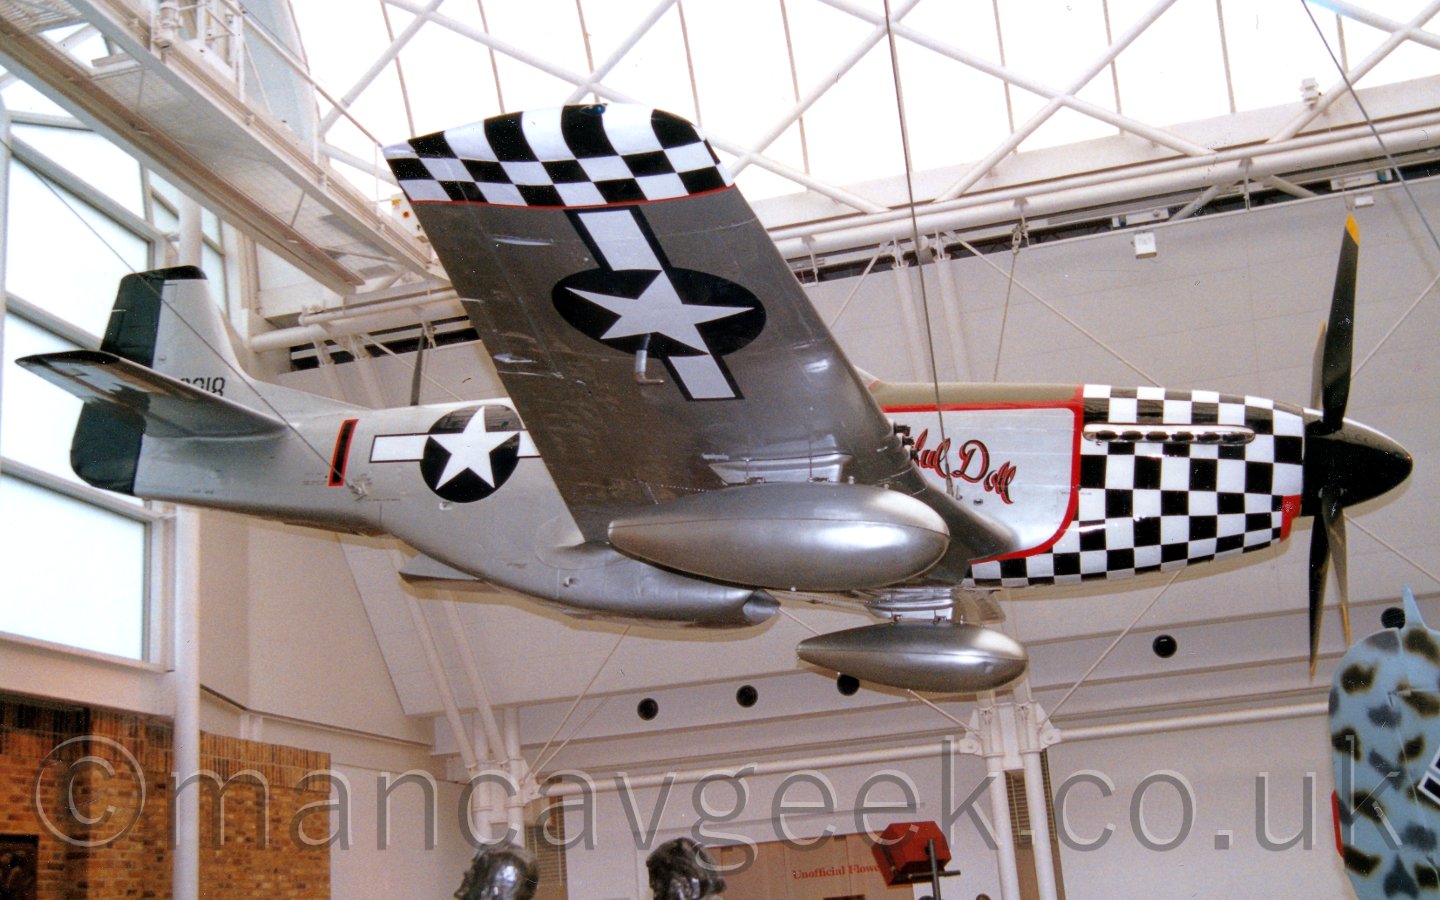 Side view of a World War II-era single engined fighter aircraft suspended from the roof of a museum, to replicate it's appearance in flight. the plane is mostly a silver colour, with a black and white checkerboard pattern over the engine cowling in the nose, and over the wingtips, outlined in red. There are white circles containing a white, 5-pointed star, and a white bar outlined in blue on each side, on the rear fuselage and under the wings. In the background, the white walls and curved glazed roof of the museum provide great, flat lighting for the room.